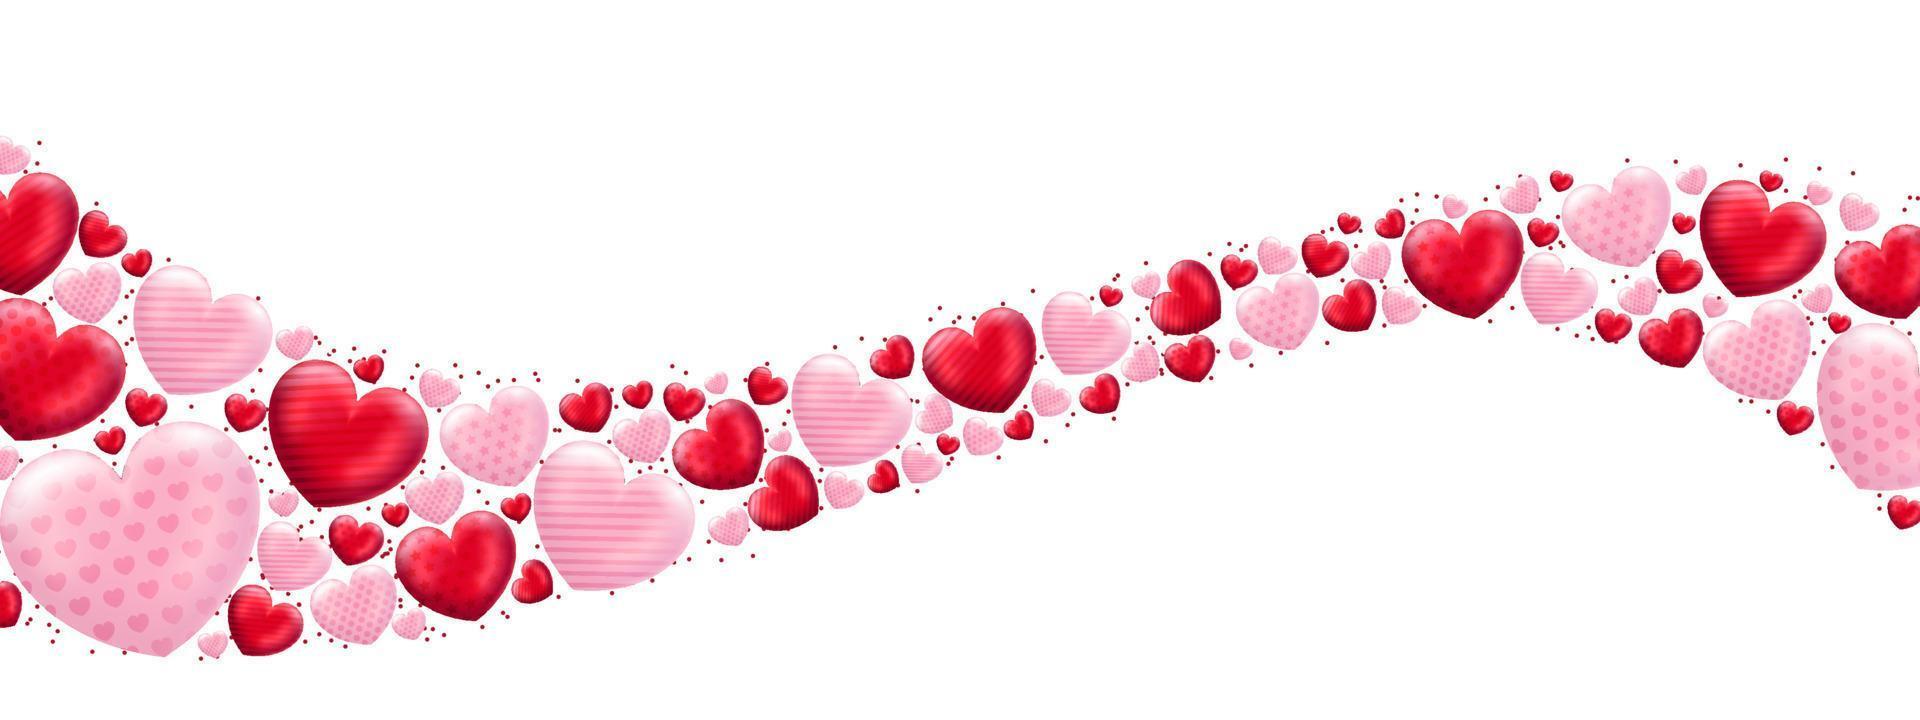 Waving Love heart template header or footer for background, banner, poster, cover design, social media feed, stories. Happy Valentines Day greeting concept vector